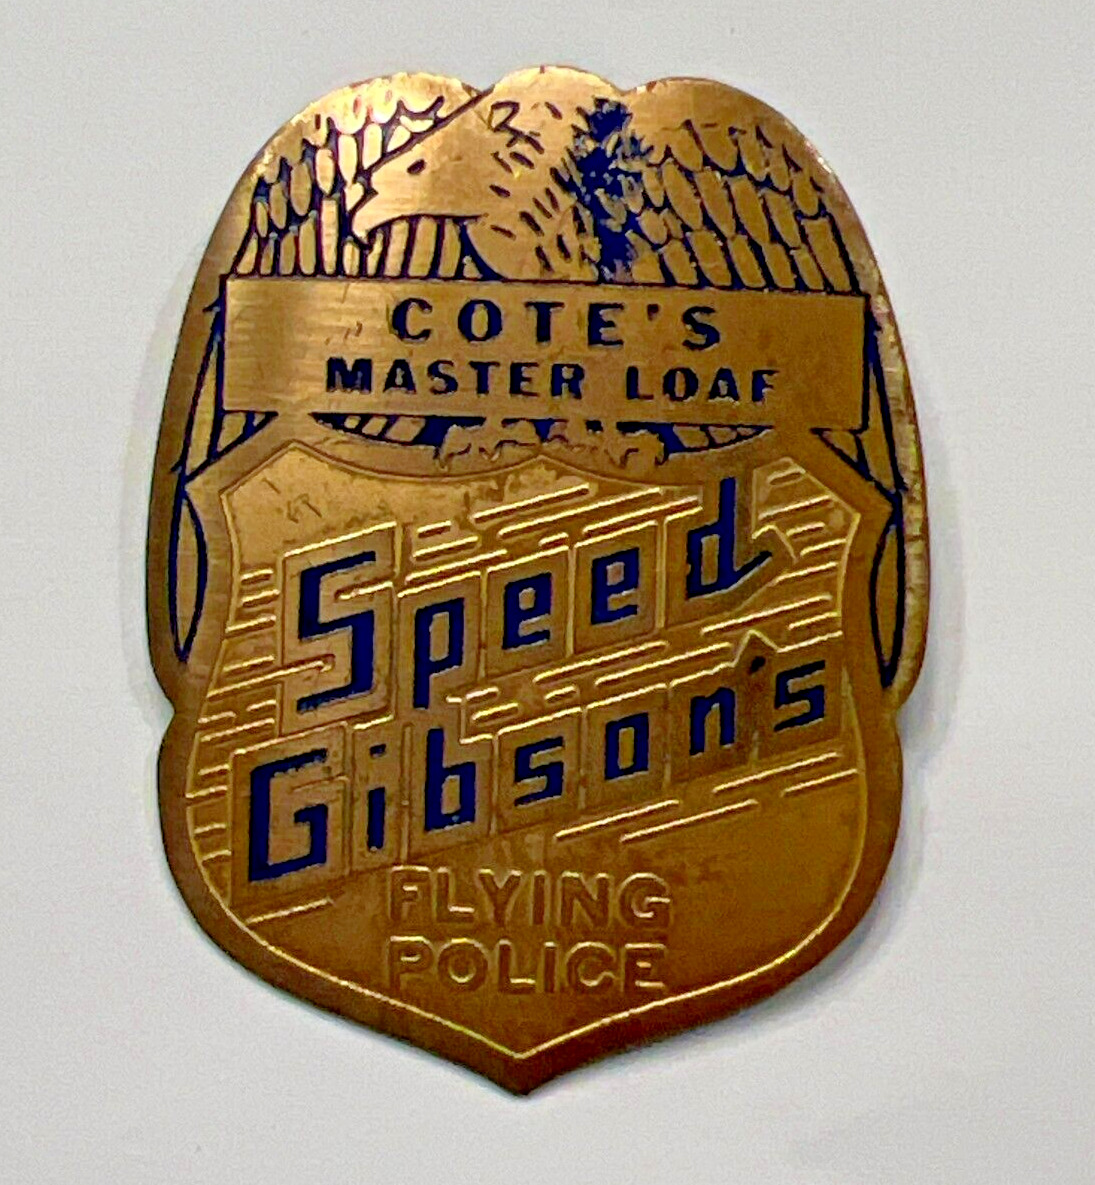 Speed Gibson’s Flying Police Brass Badge Cote’s Master Loaf 1937 Radio Premium